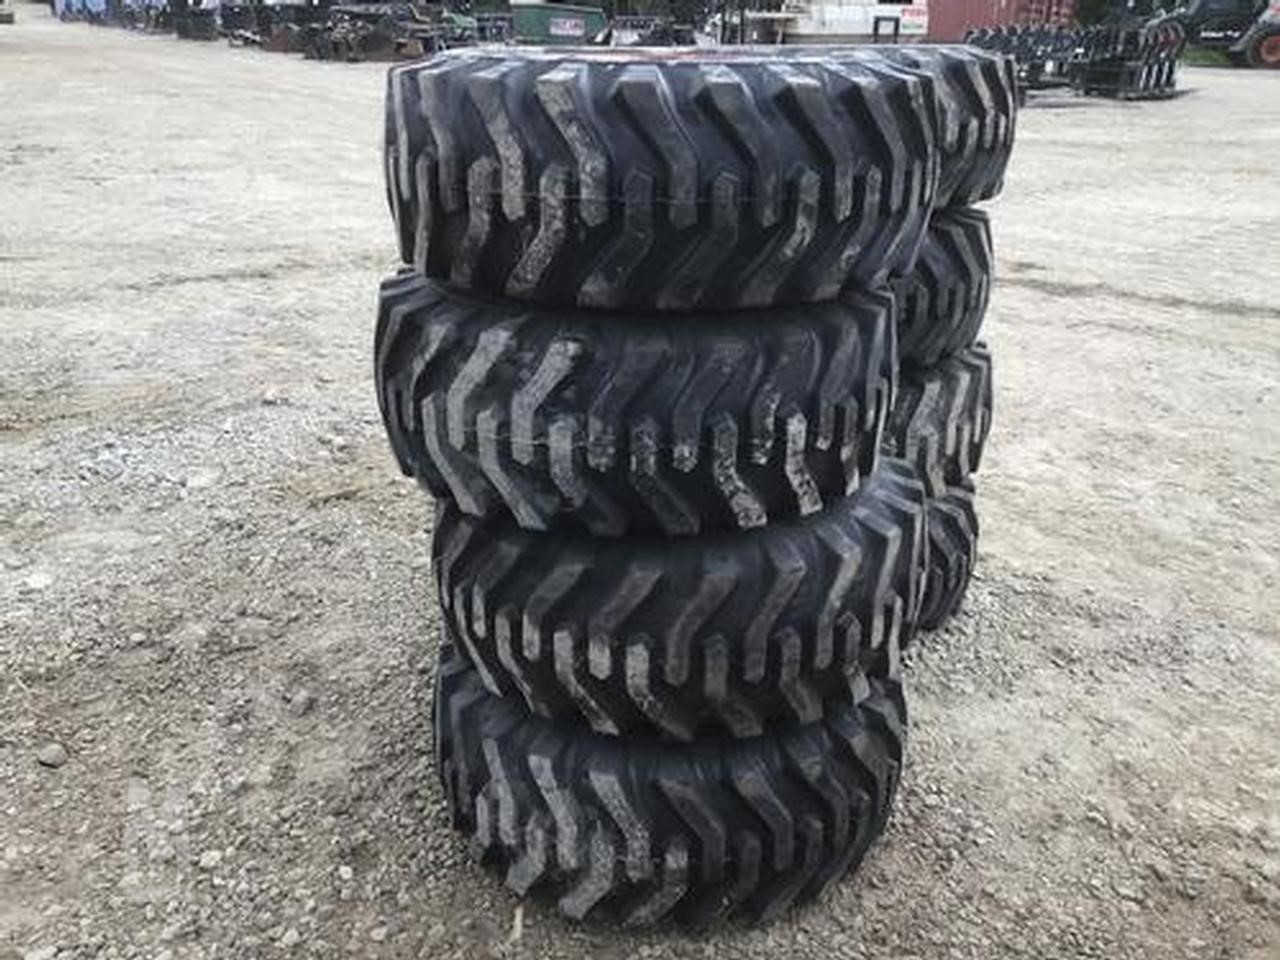 Details about   New 29X12.5-15 OTR Traction Master Tire 8 ply Tubeless 29X12.50-15 NHS